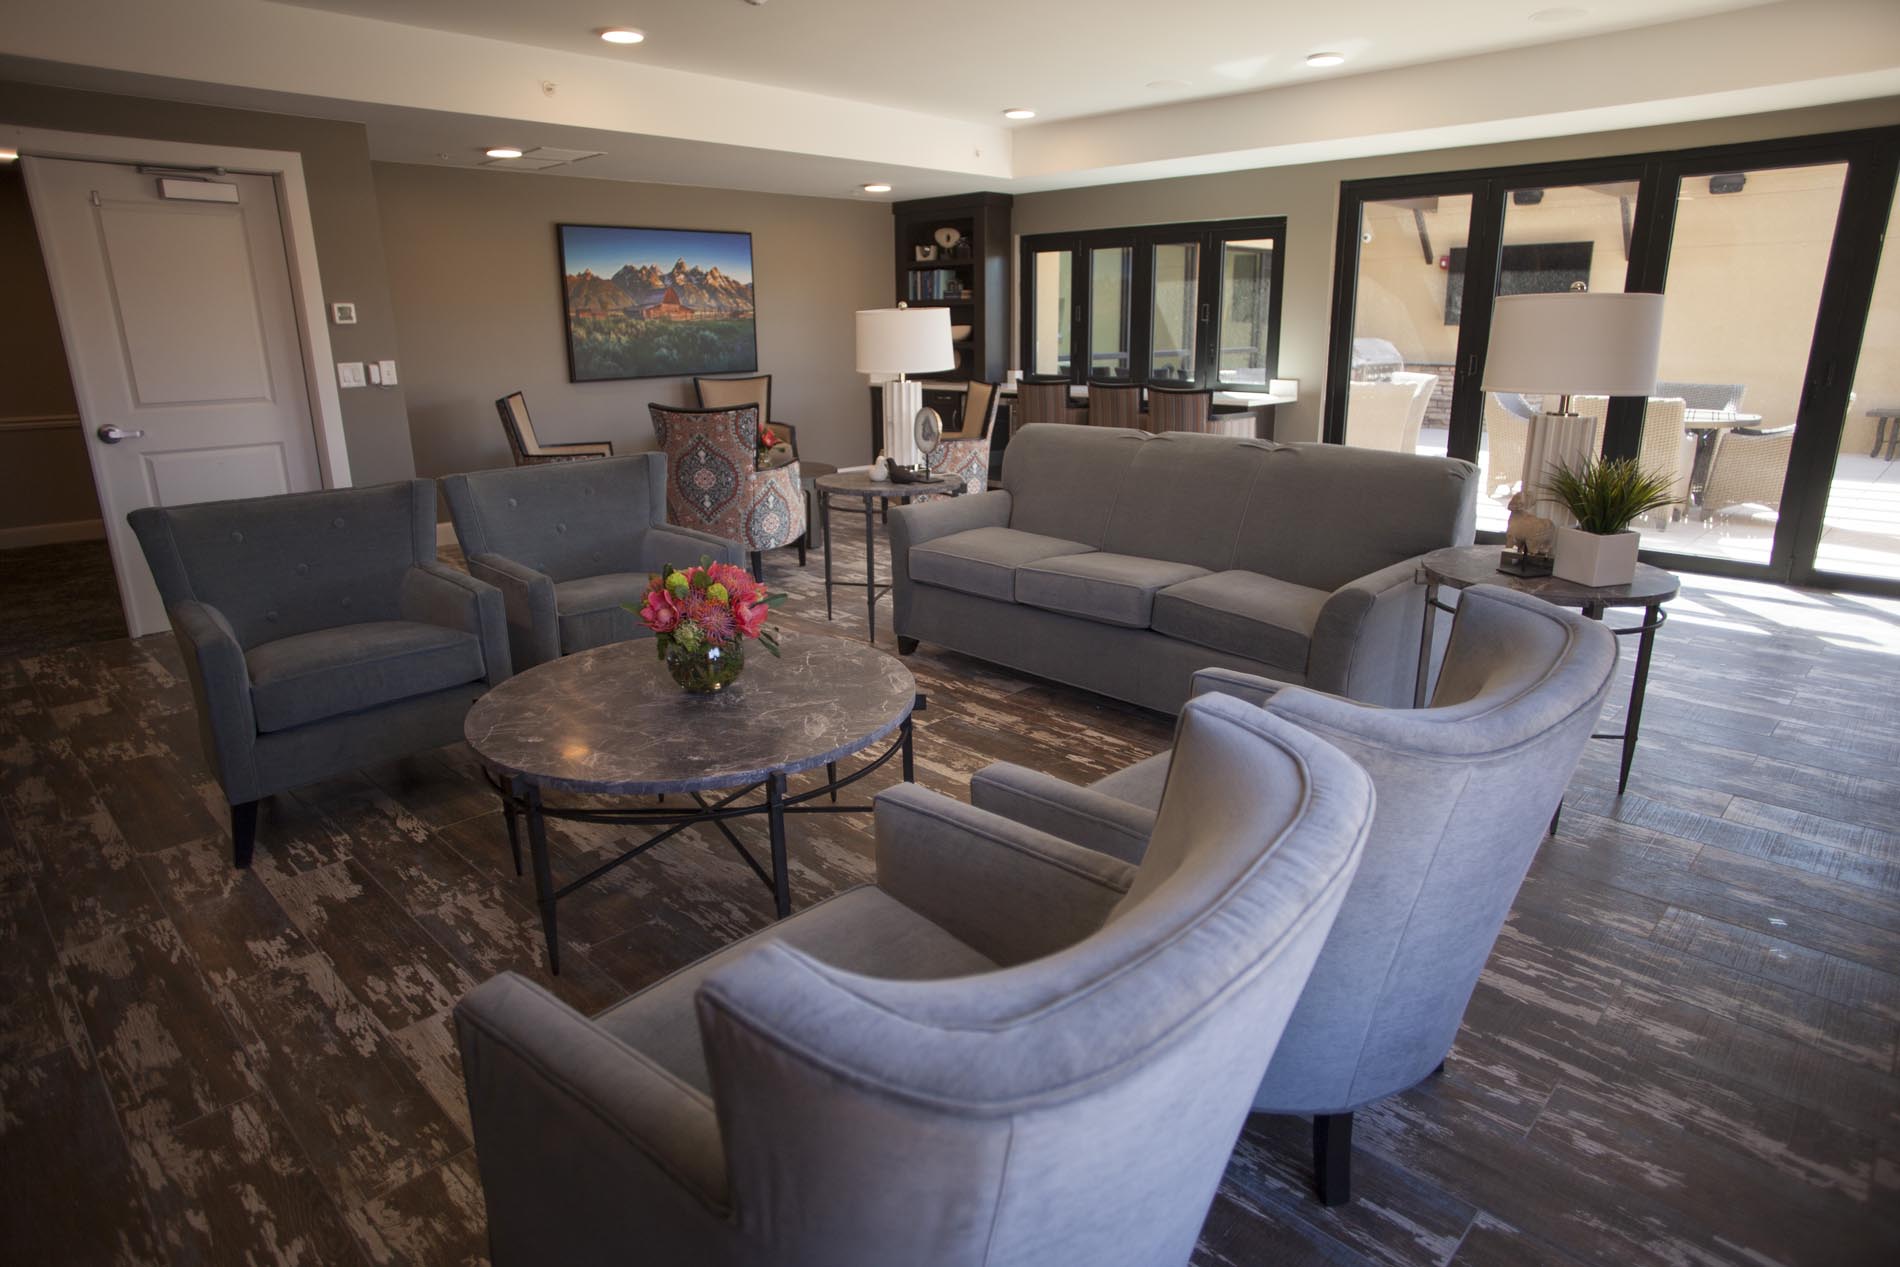 Ovation Sienna Hills Common Area Couches